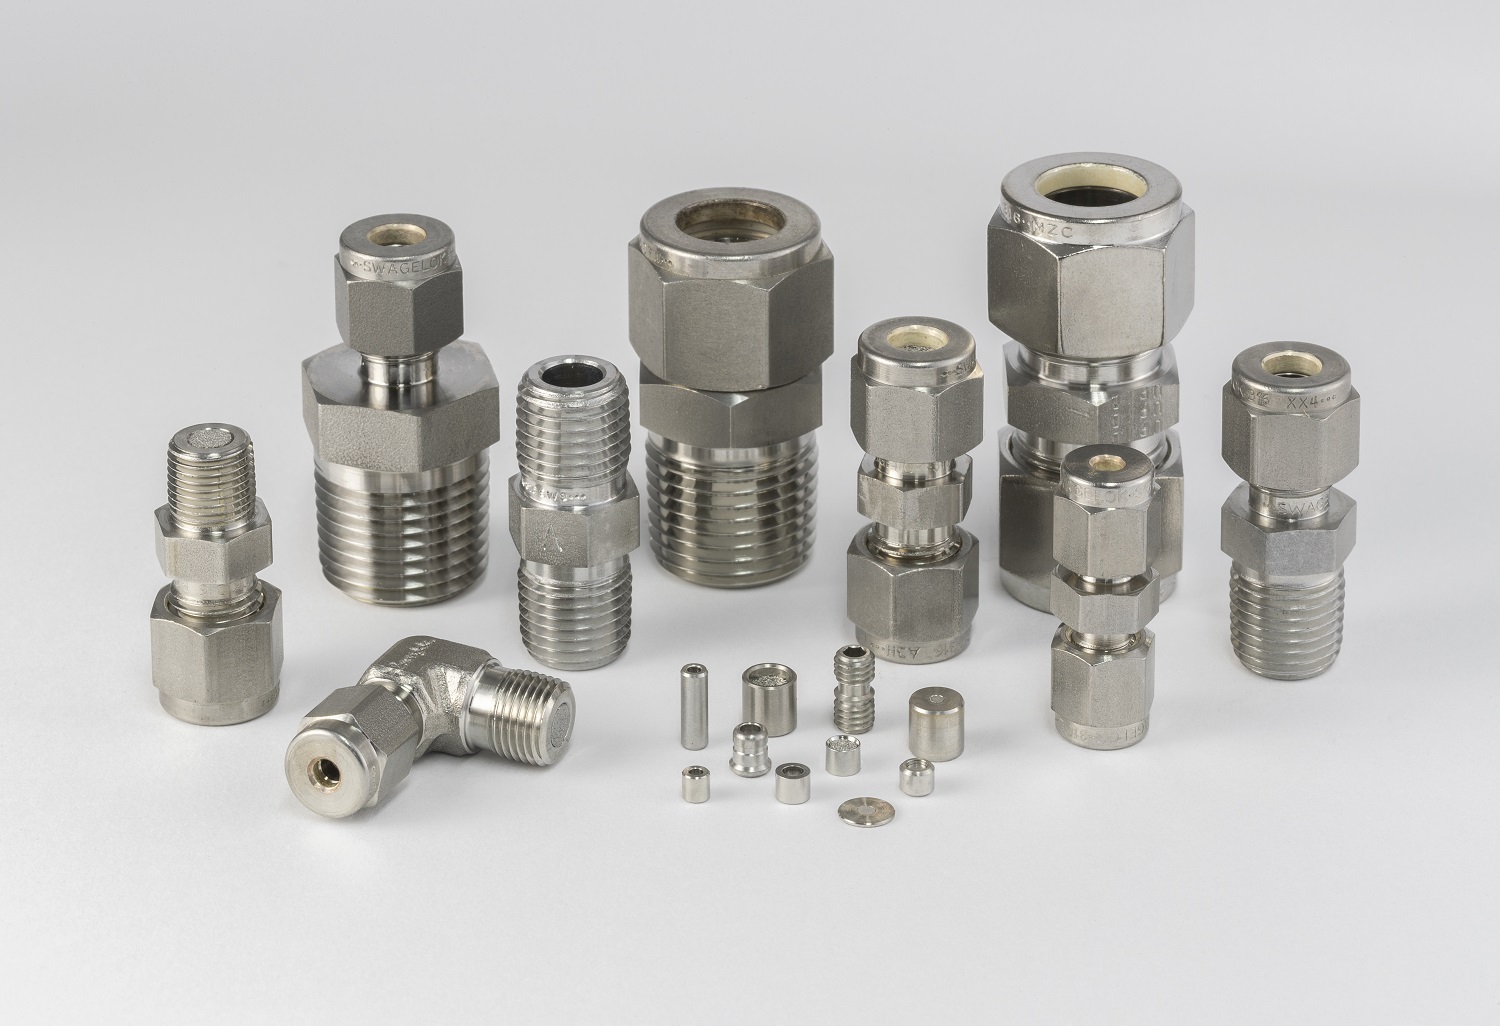 Porvair's new Restrictive Flow Products line is for OEM and custom applications.